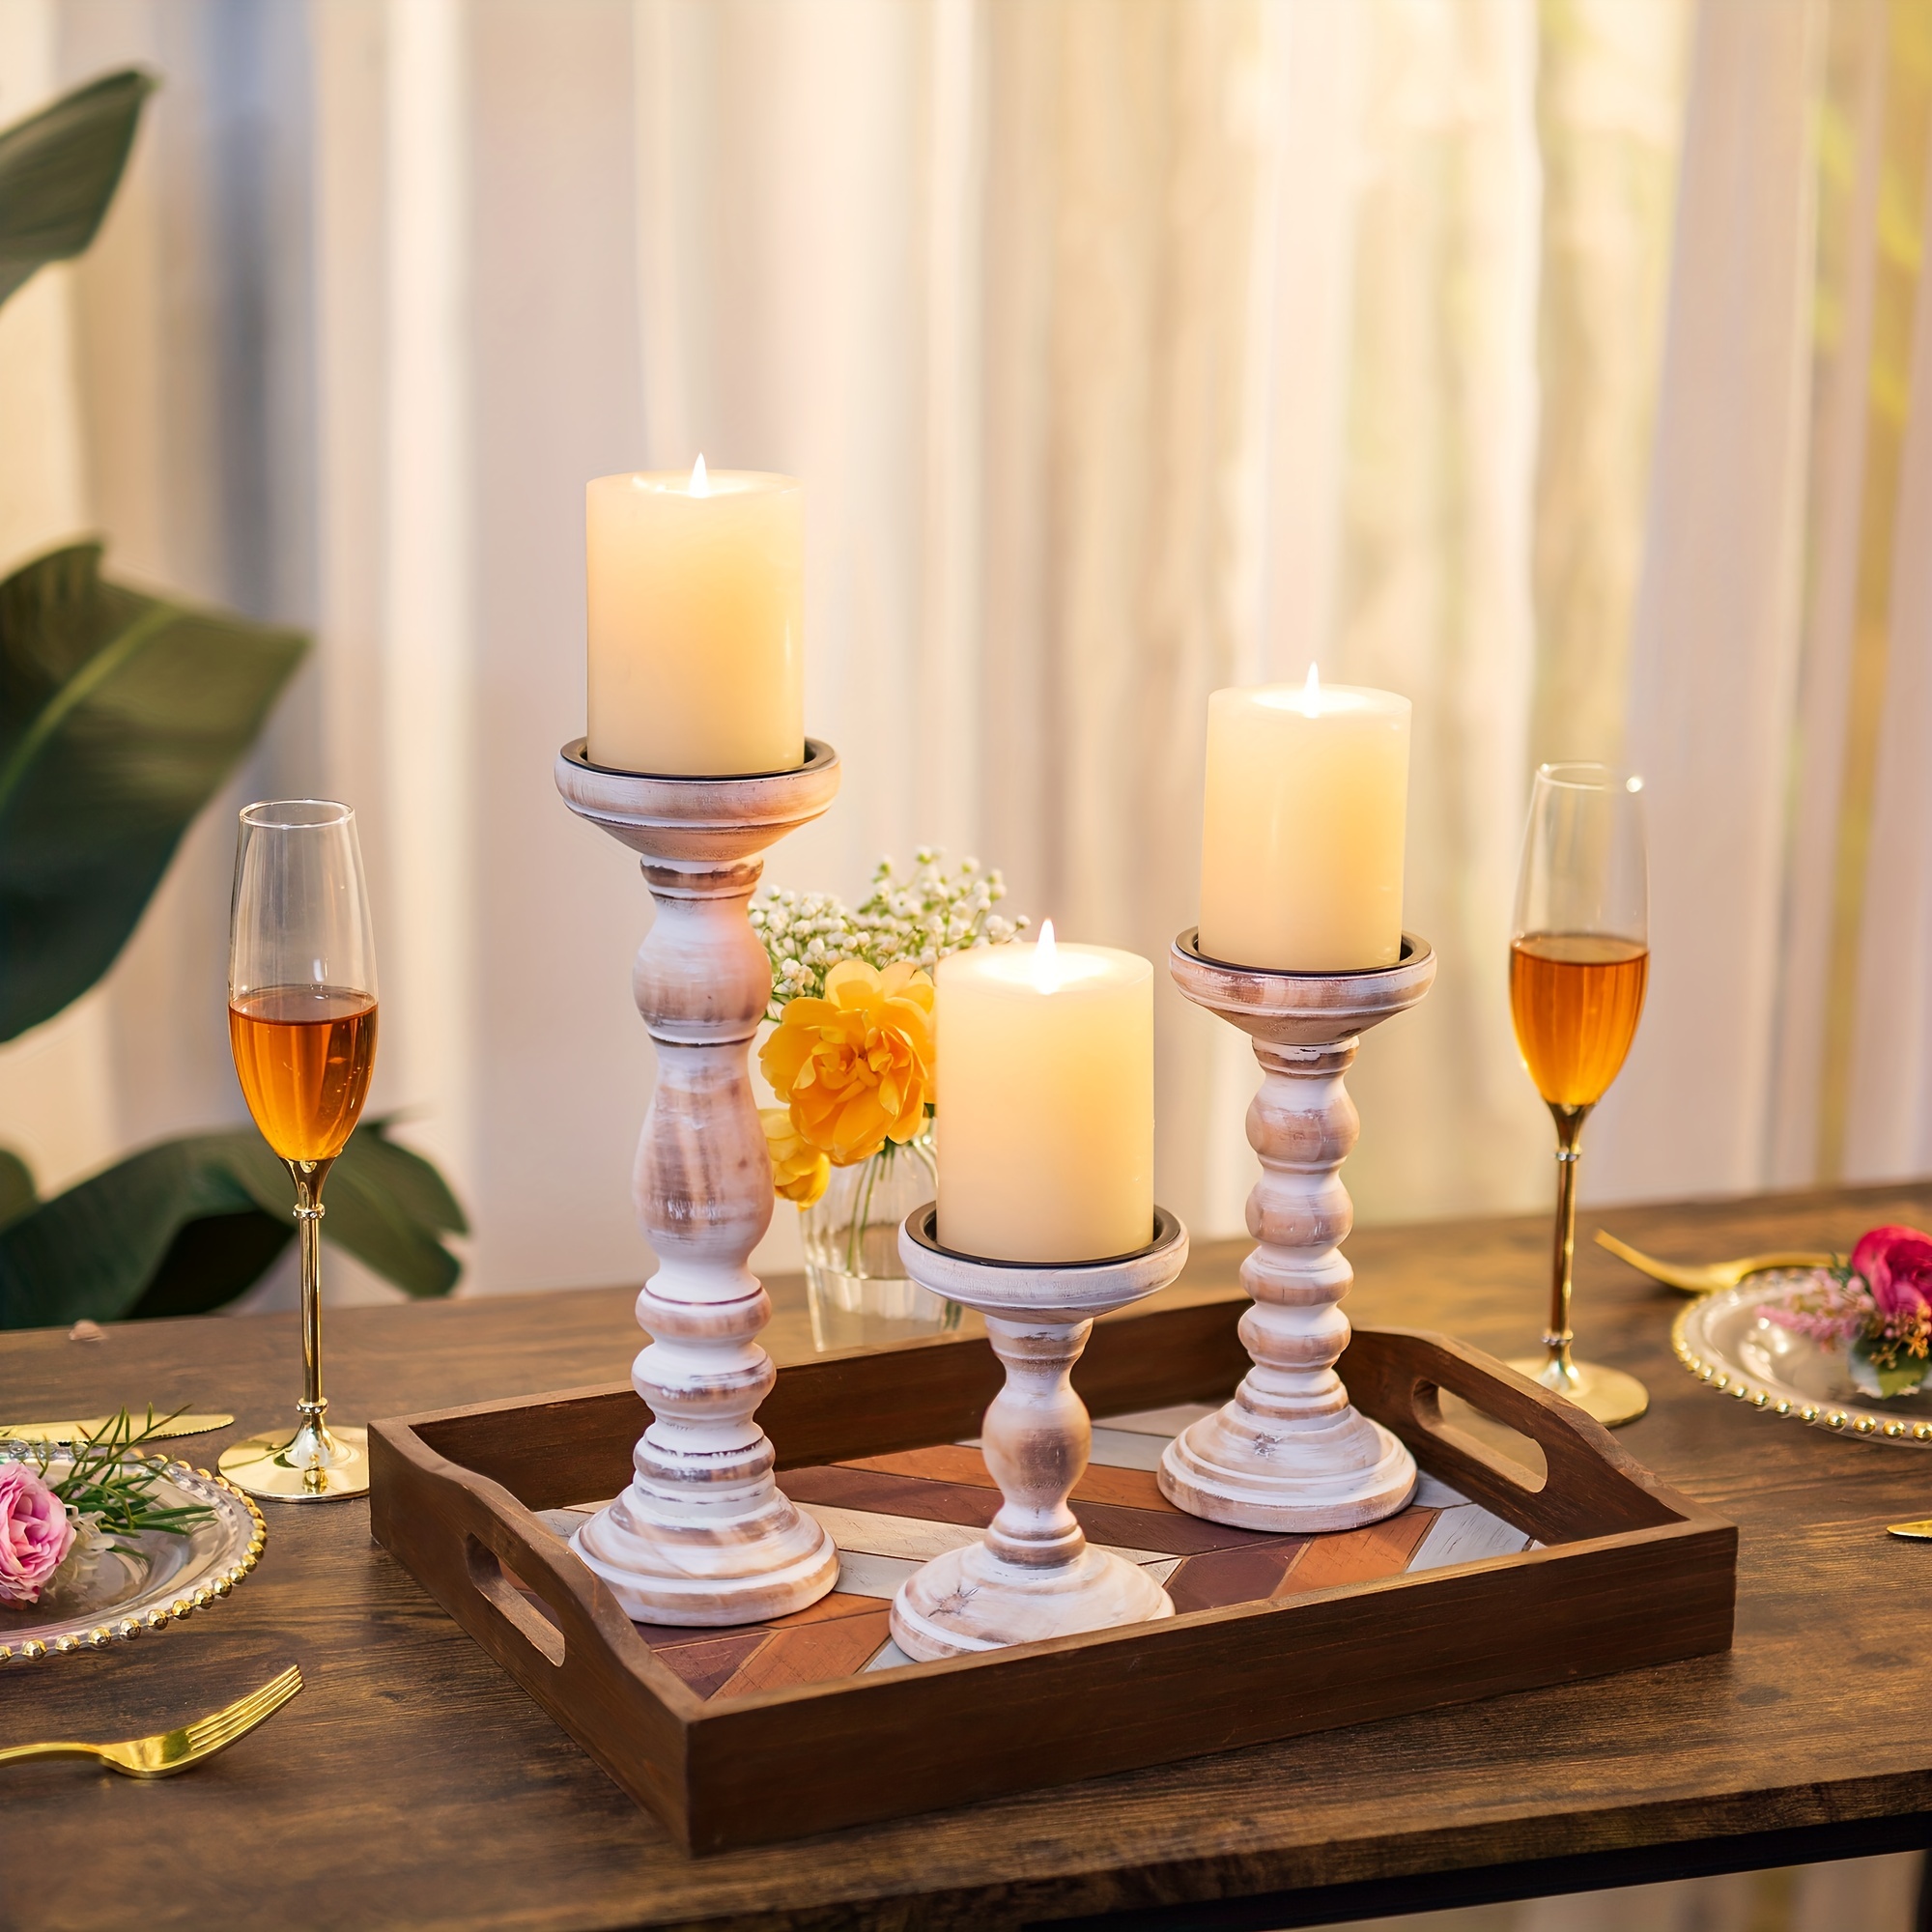  OLEEK Wood Candle Holders for Table Centerpiece (9,8,6) -  (fits 7/8 Candles) Farmhouse Wooden Candlestick Holder Set - Fall Rustic Candle  Holder Wood - Antique Decorative Candles for Home Decor 